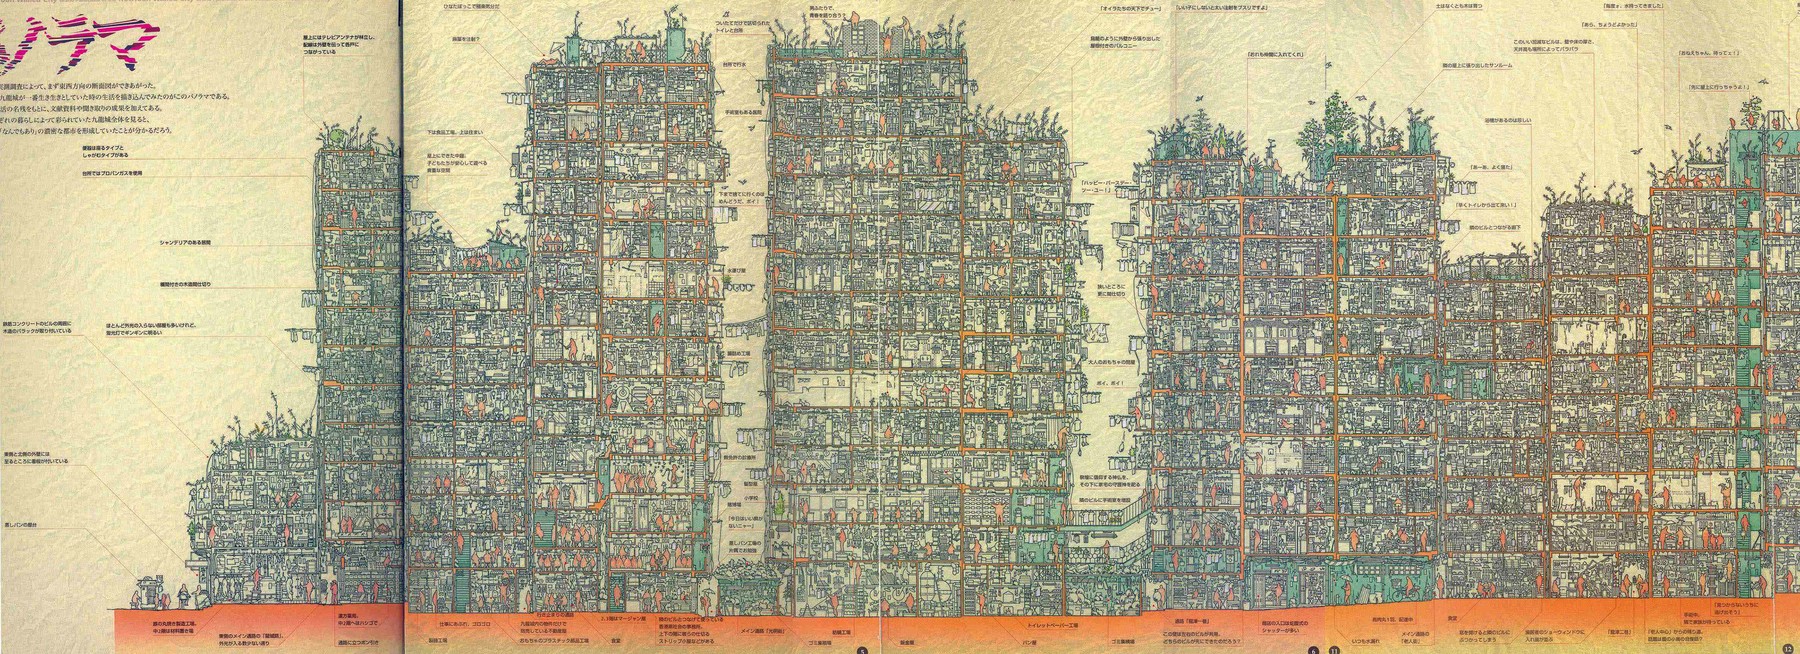 The first FULL cross-section of Kowloon Walled City